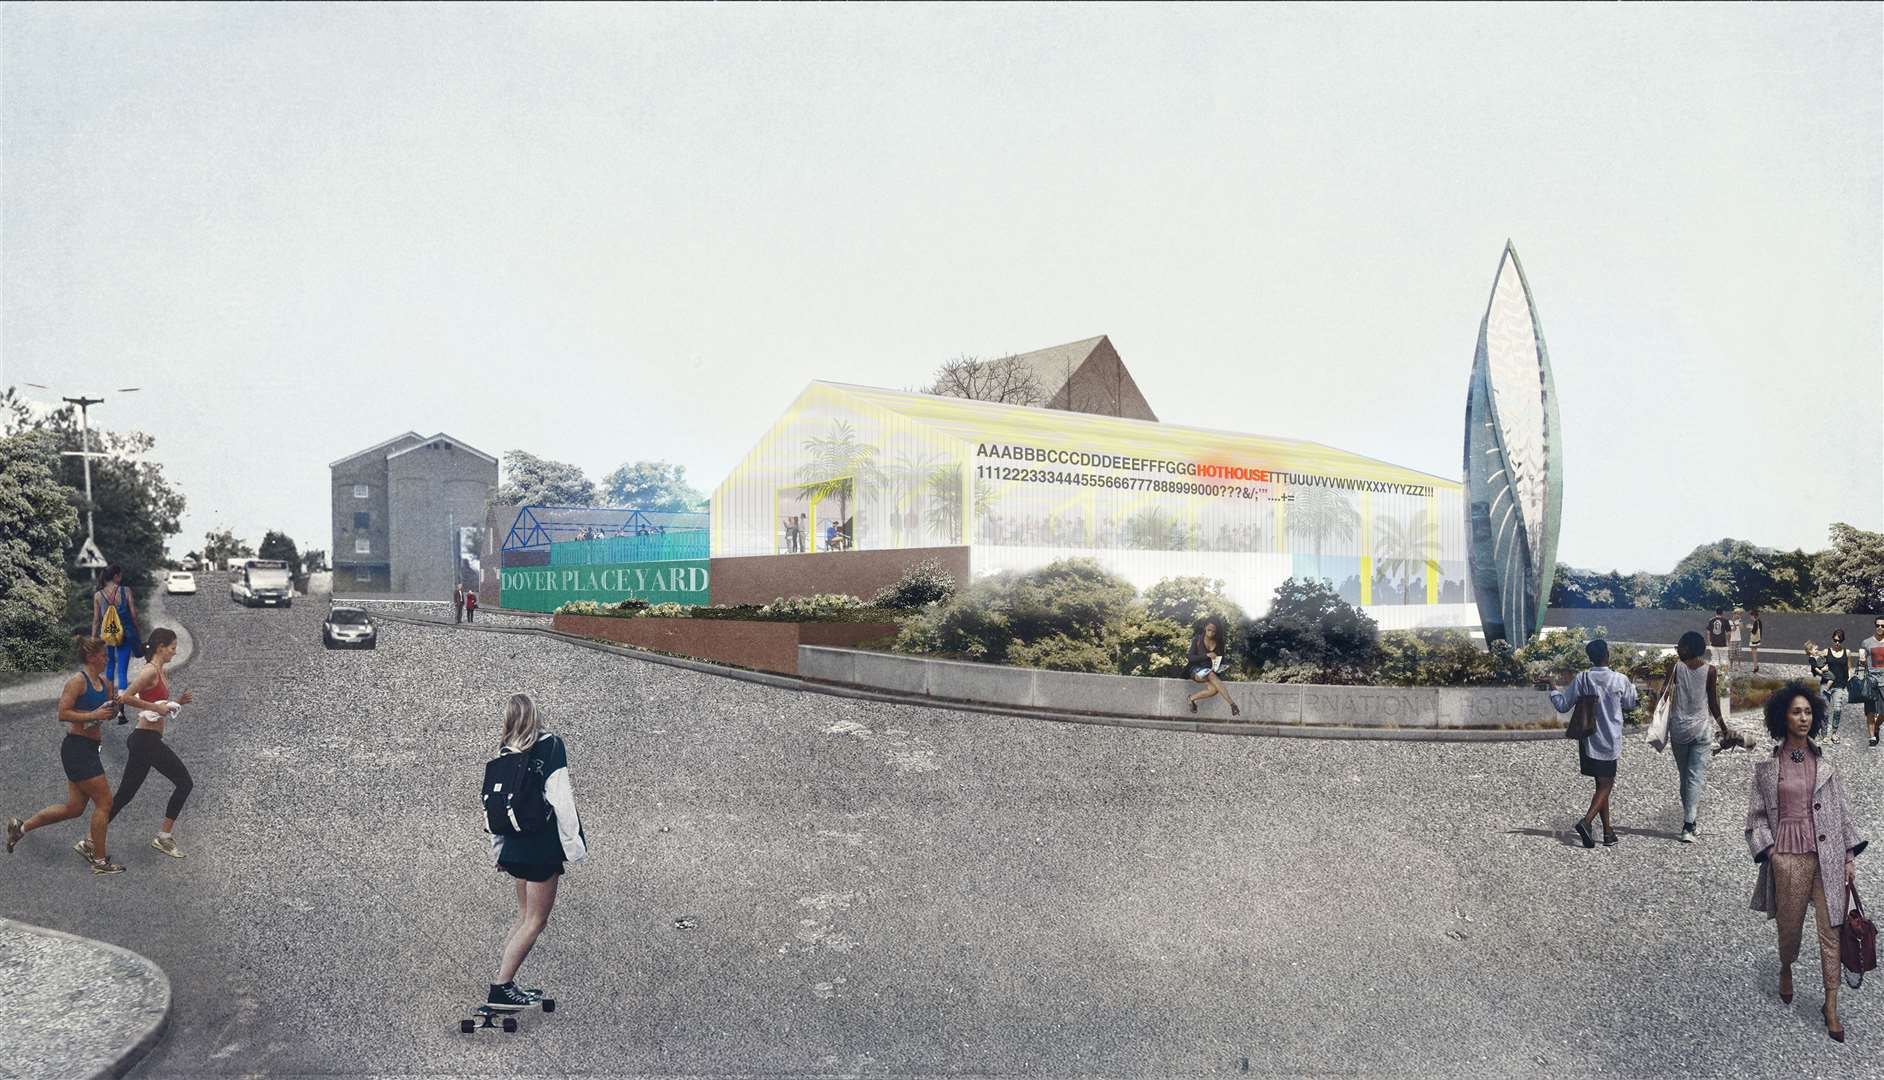 The former youth theatre will be transformed into a lantern at night